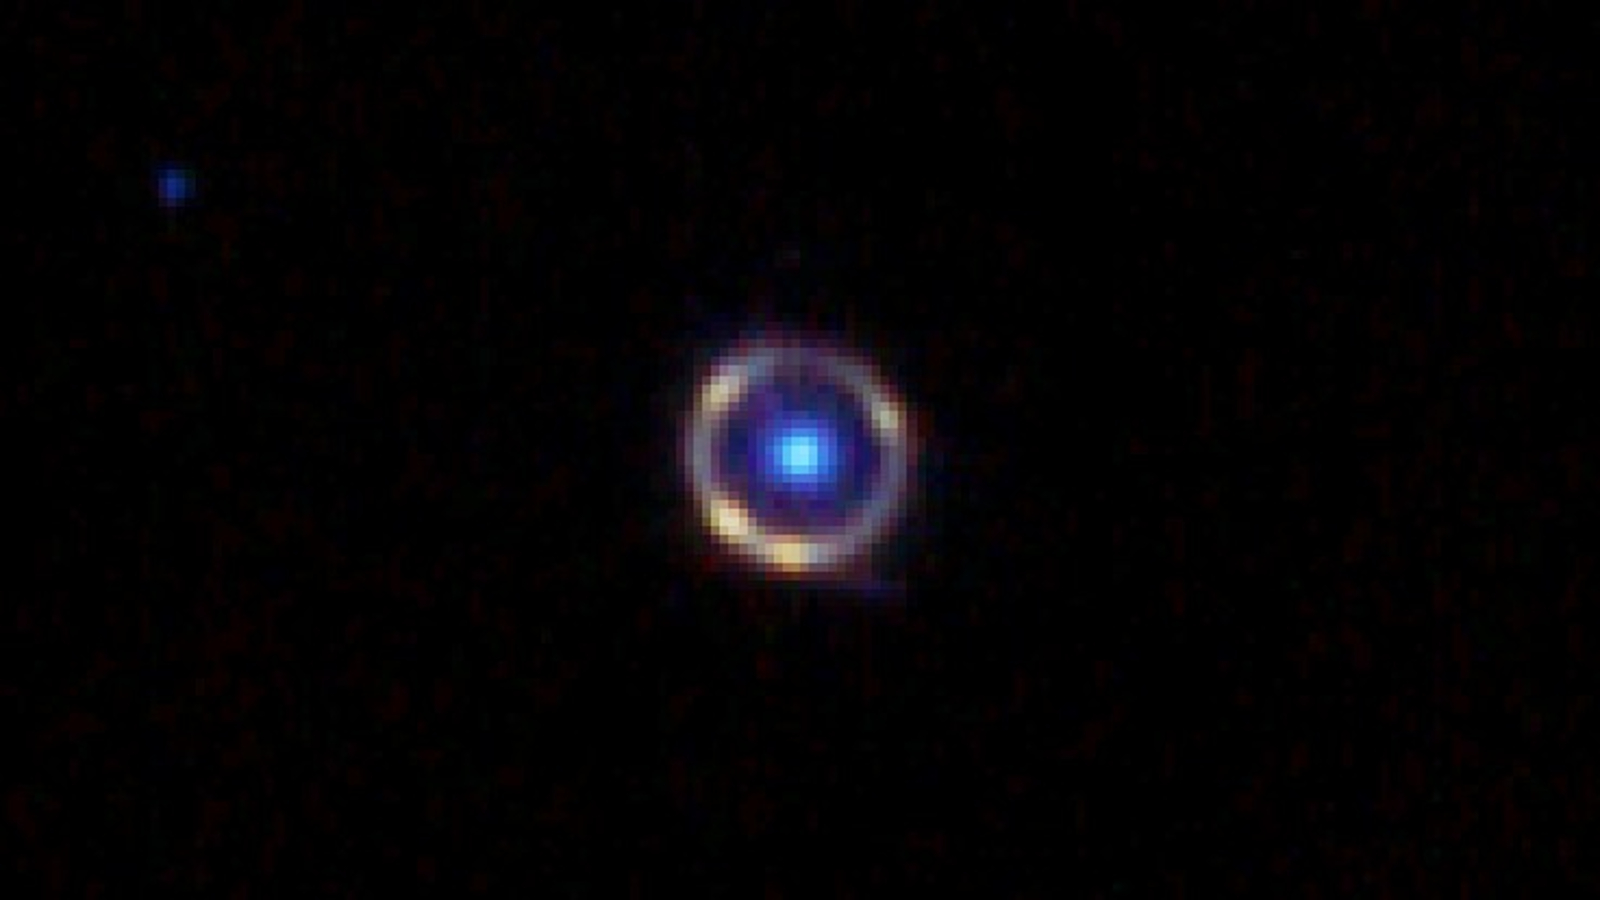 A close-up of the JO418 Einstein Ring.